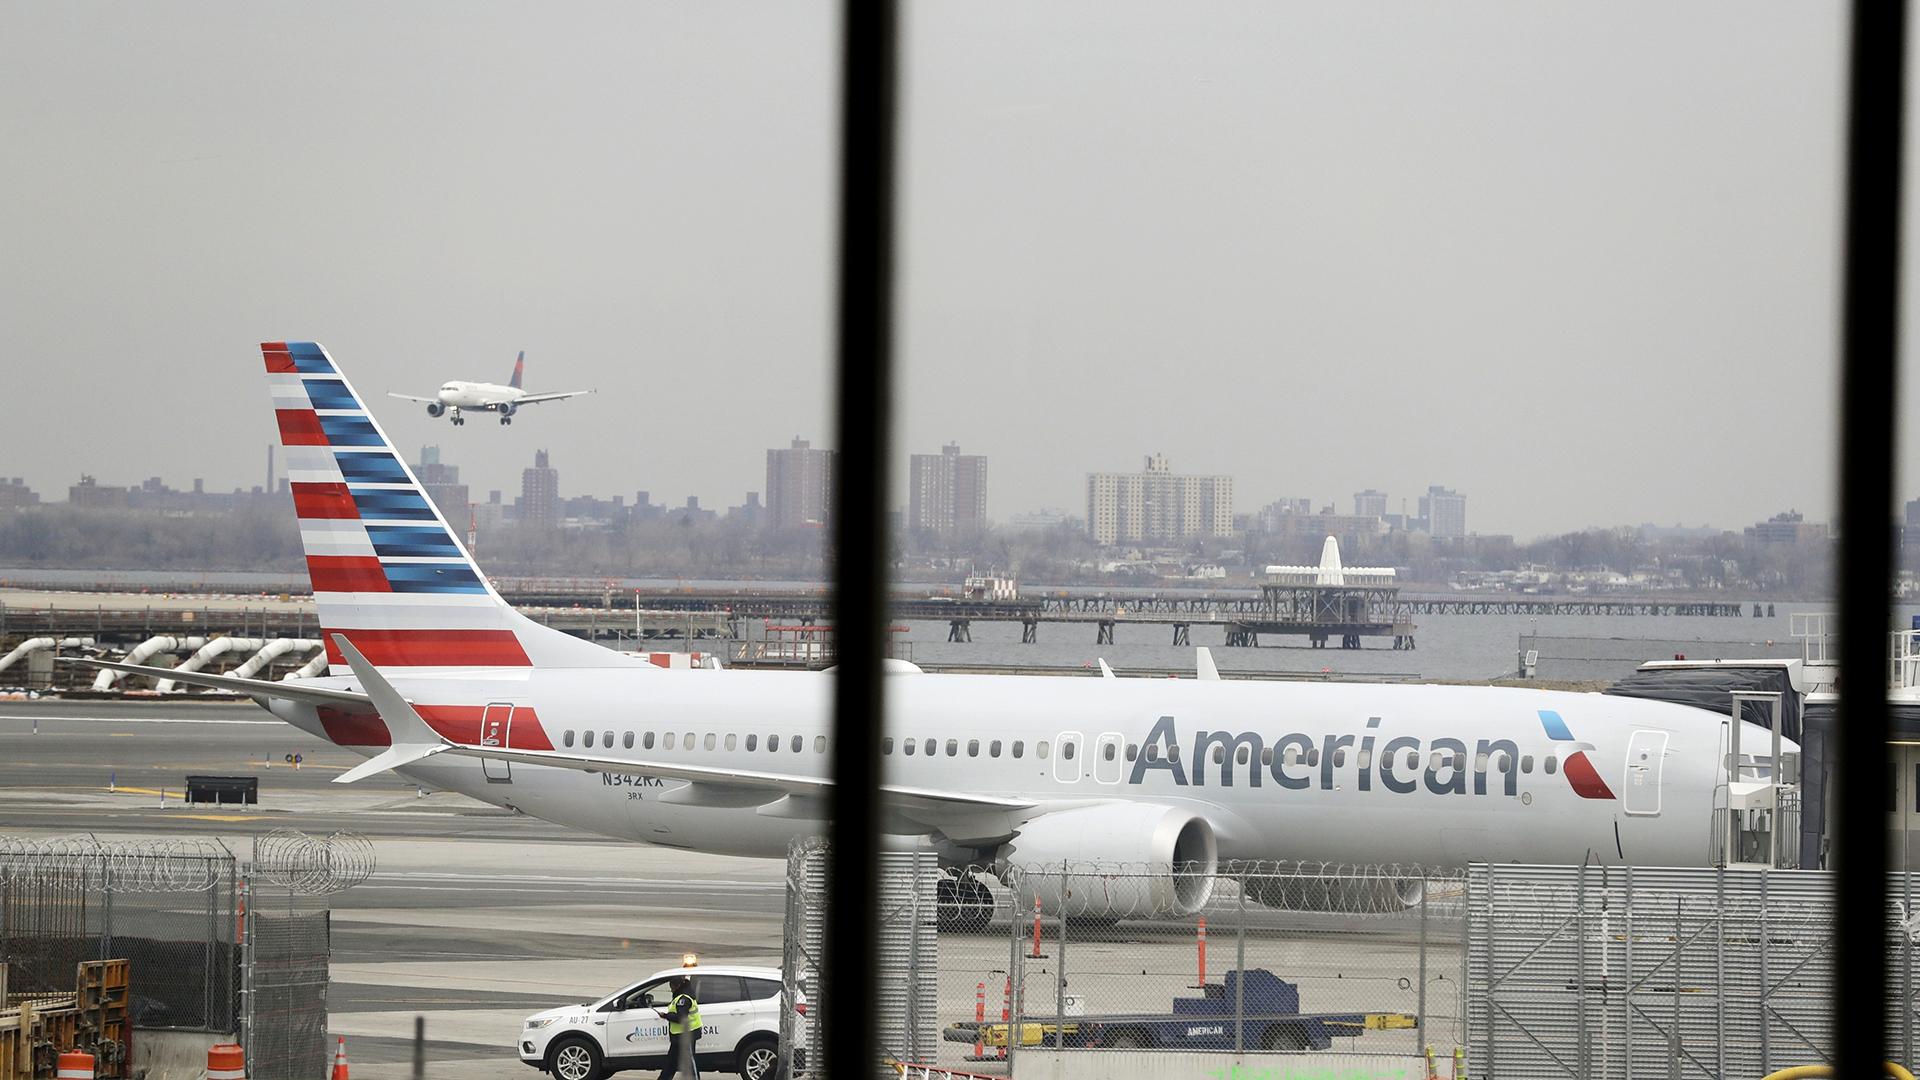 In a March 13, 2019 file photo, an American Airlines Boeing 737 MAX 8 sits at a boarding gate at LaGuardia Airport in New York. (AP Photo / Frank Franklin II, File)